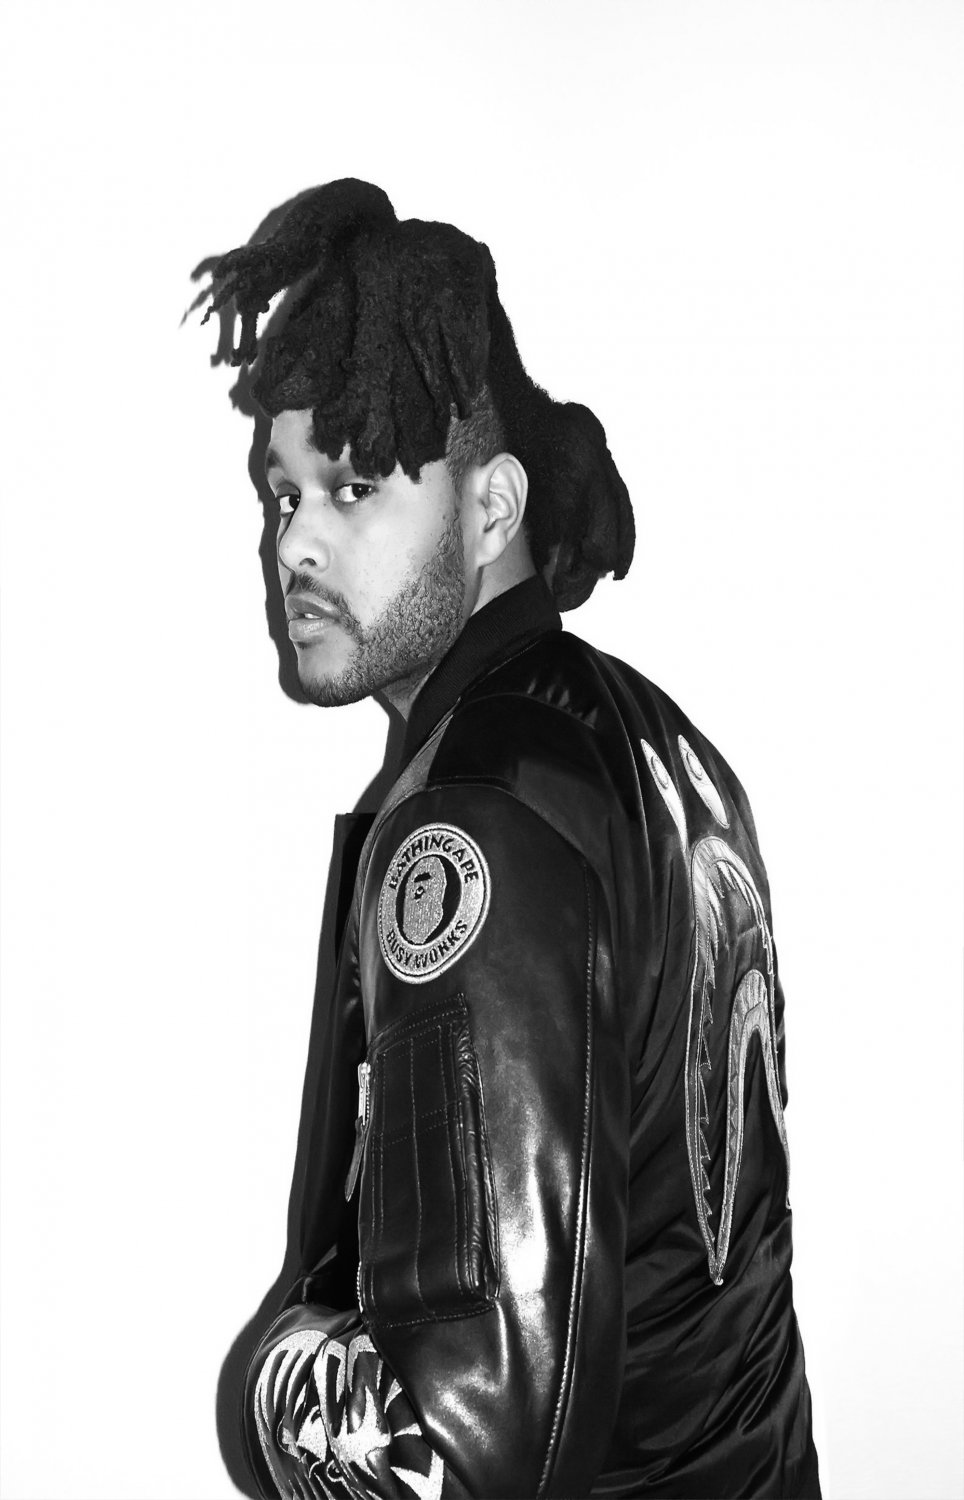 The Weeknd  18"x28" (45cm/70cm) Poster